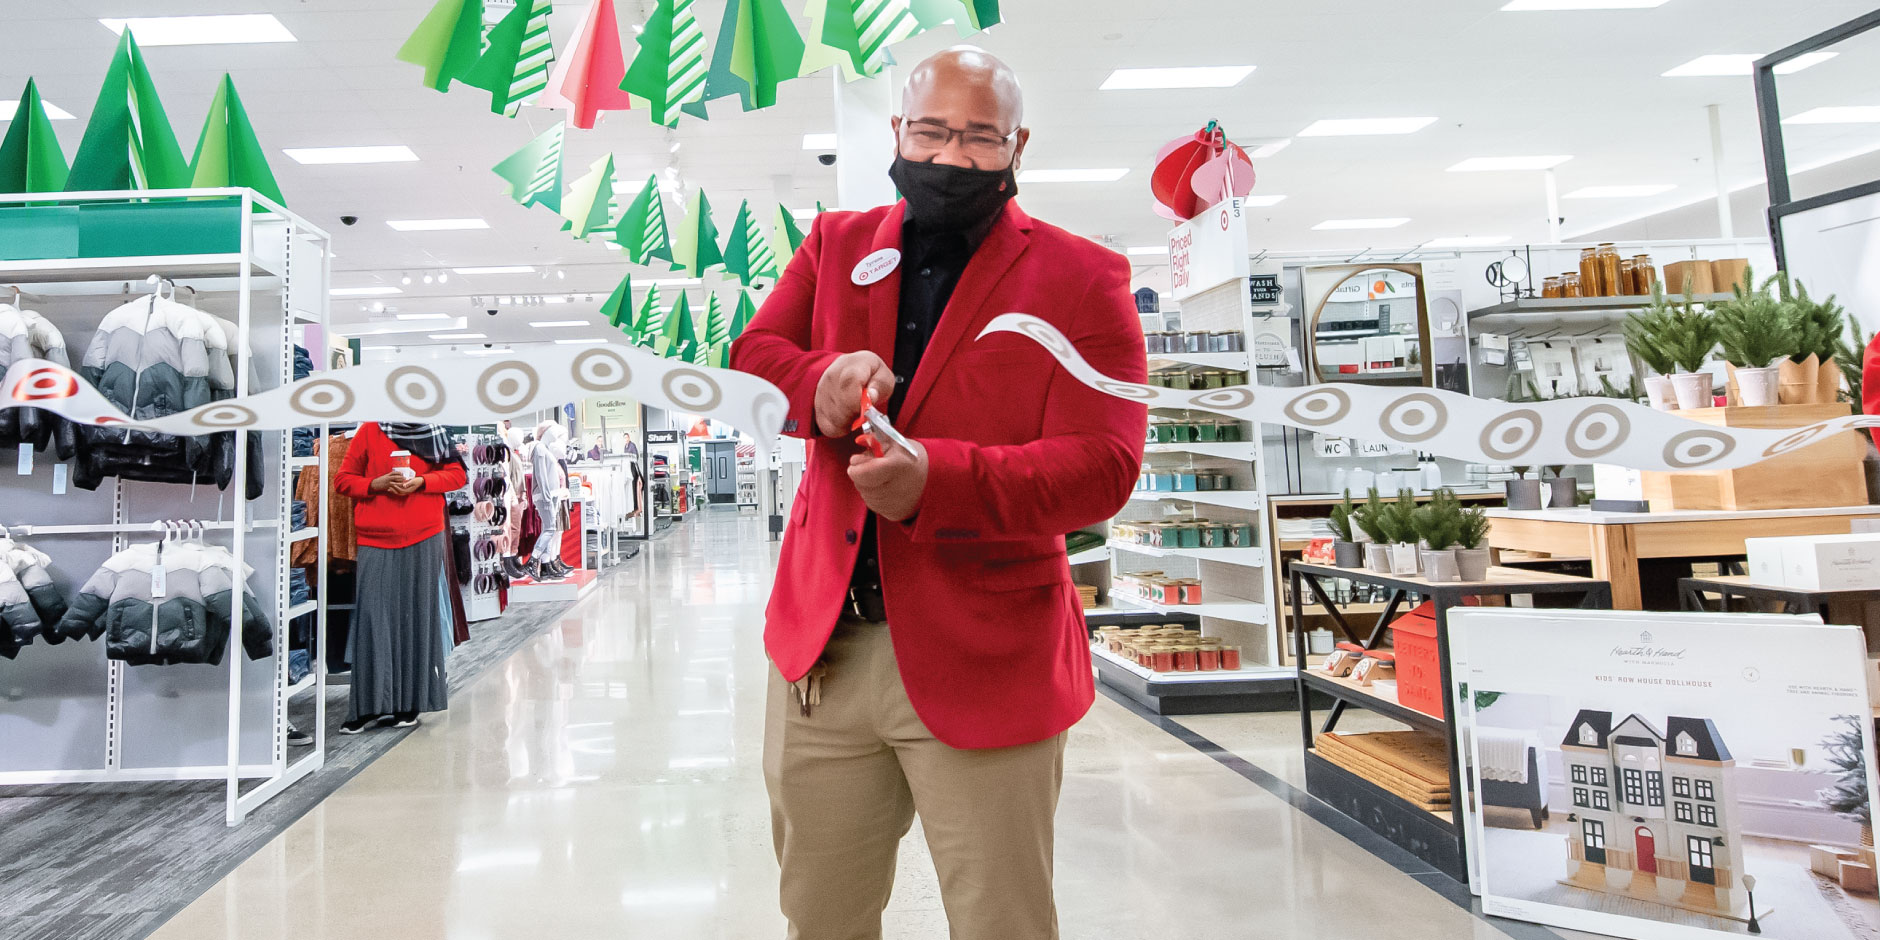 a person wearing a red coat and holding a white object in a store